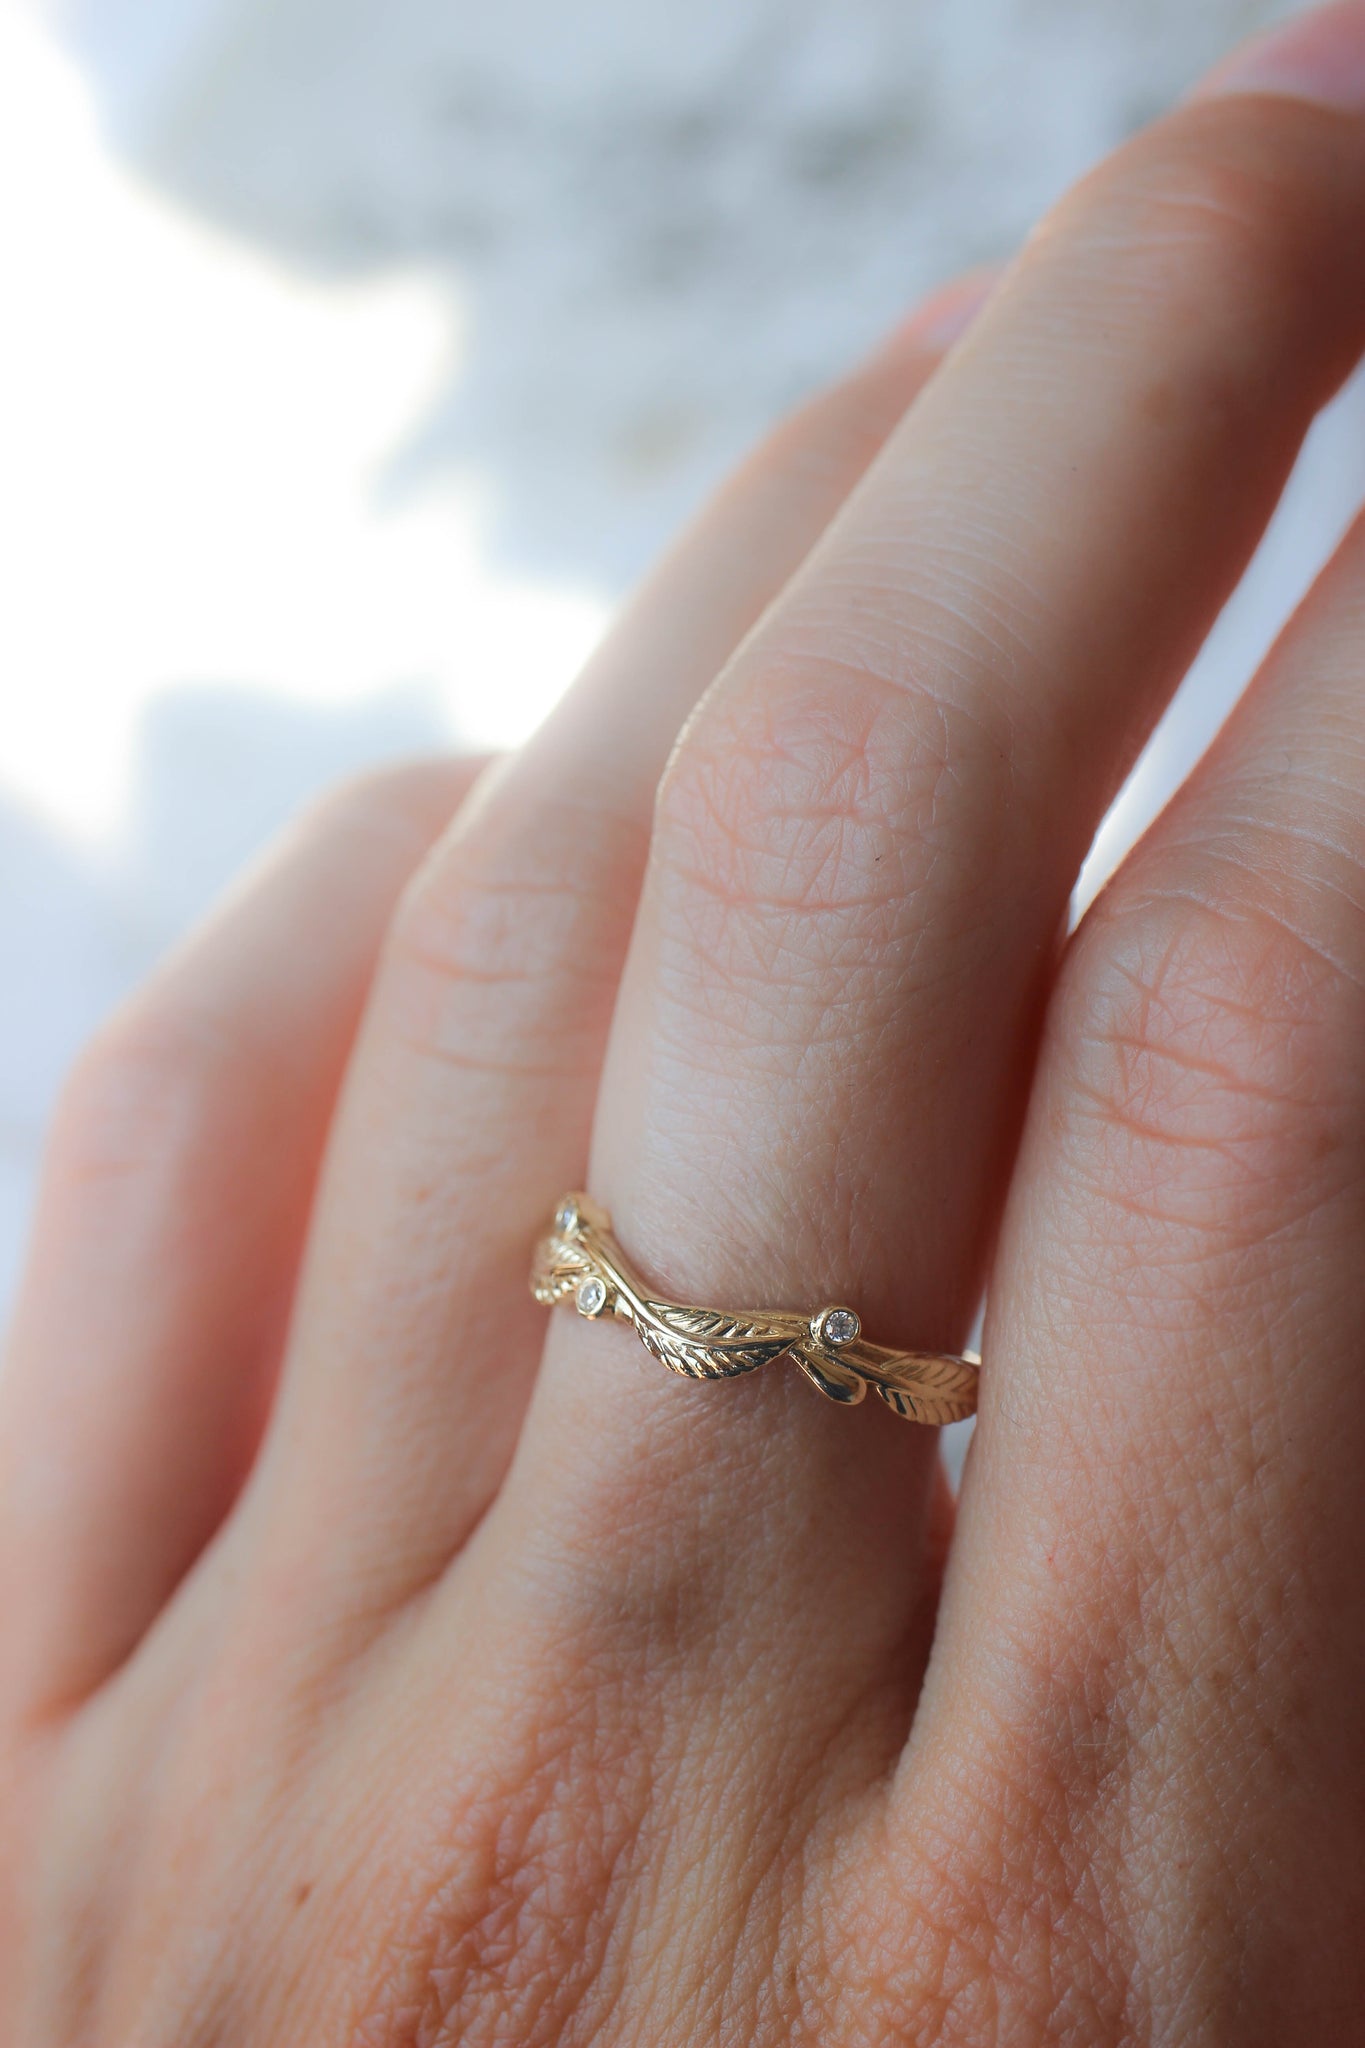 READY TO SHIP: Twig wedding ring in 14K yellow gold, moissanites, RING SIZE 7.75 US - Eden Garden Jewelry™